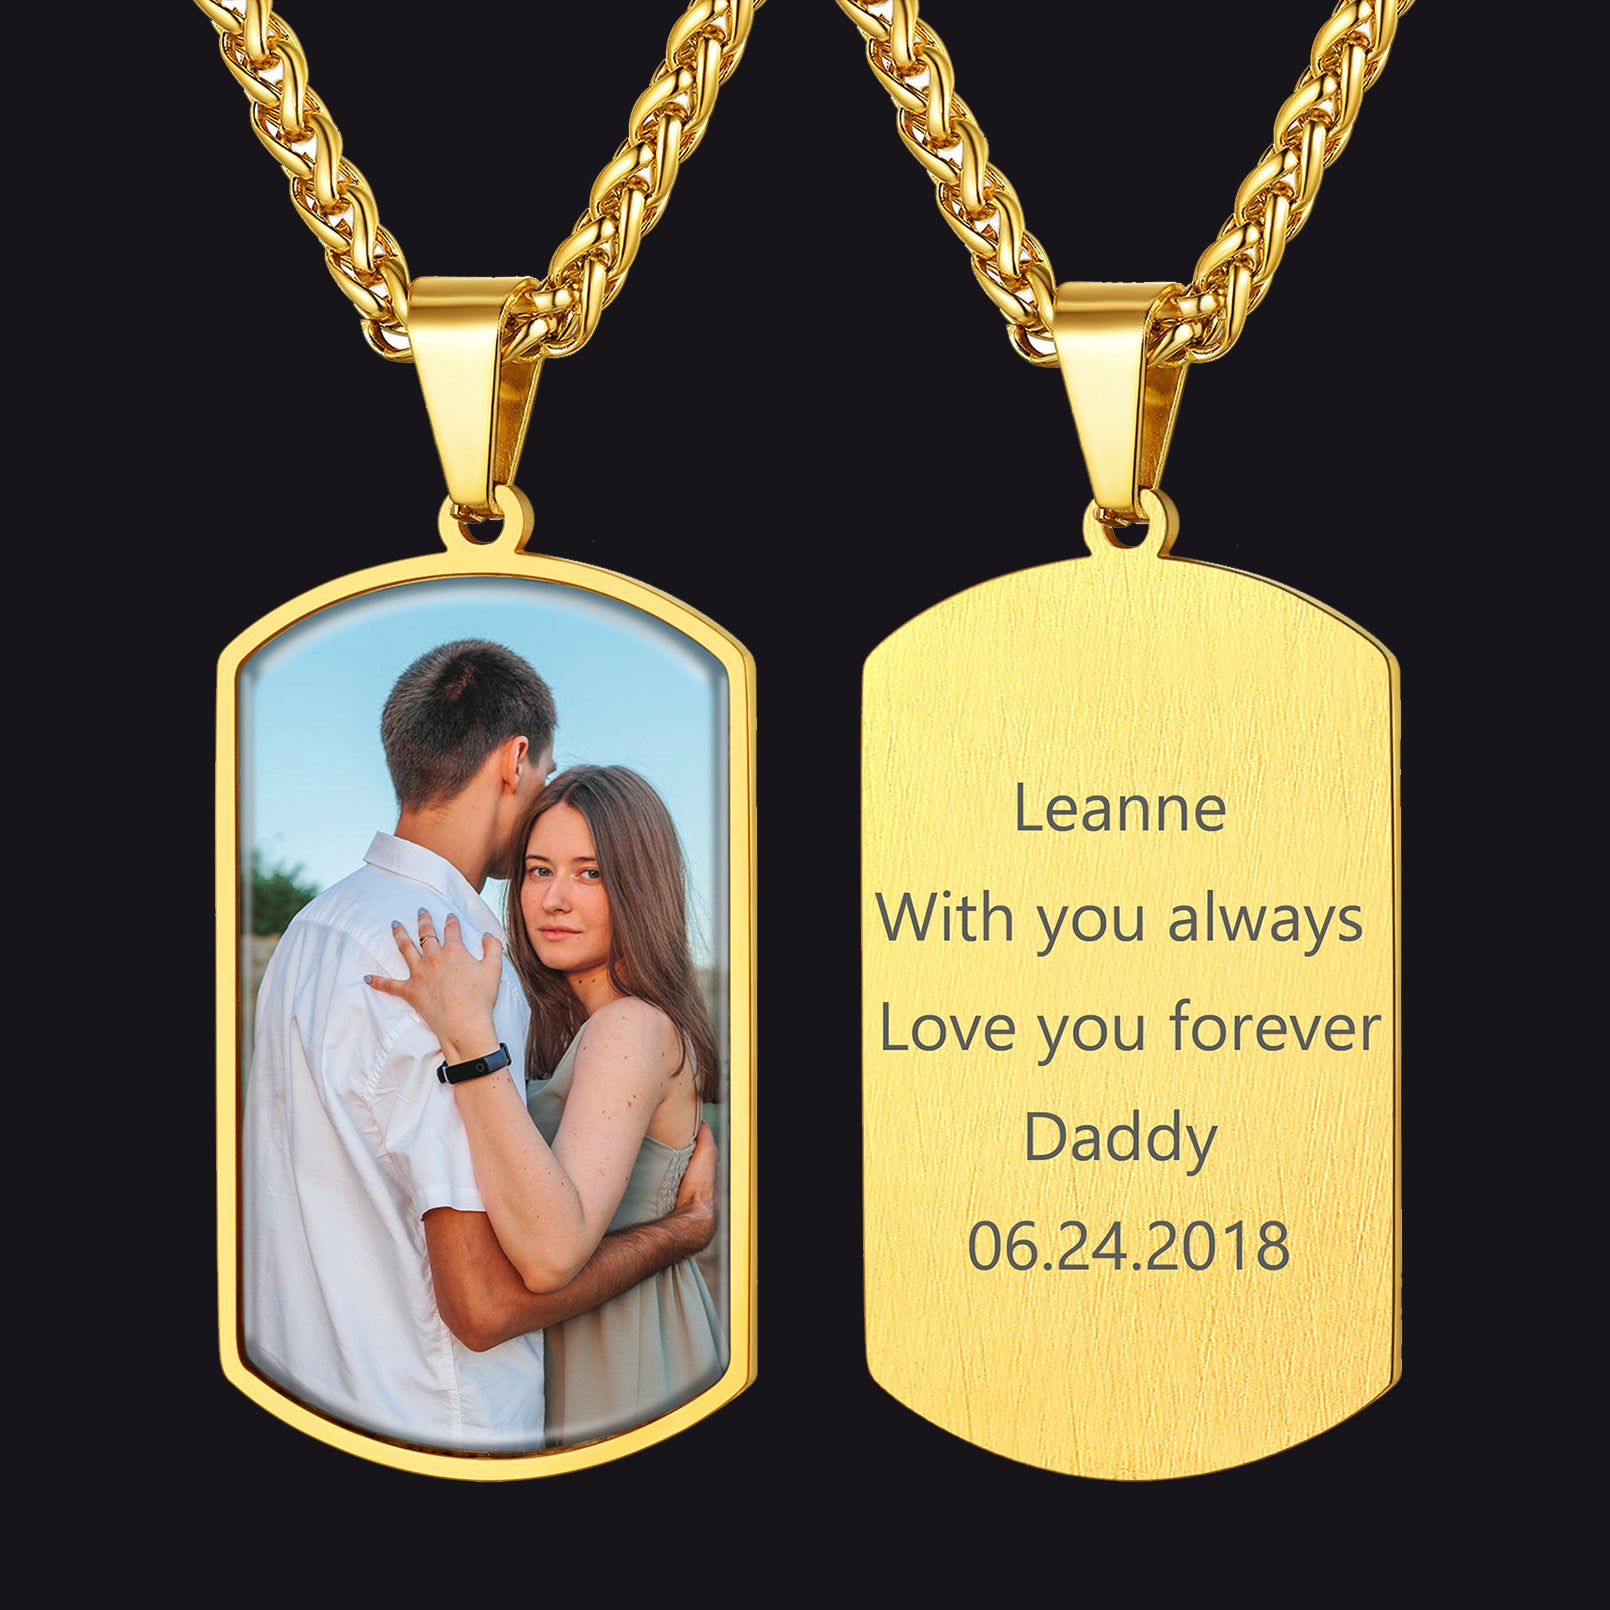 Custom Photo Dog Tag Necklace with Picture For Men FaithHeart